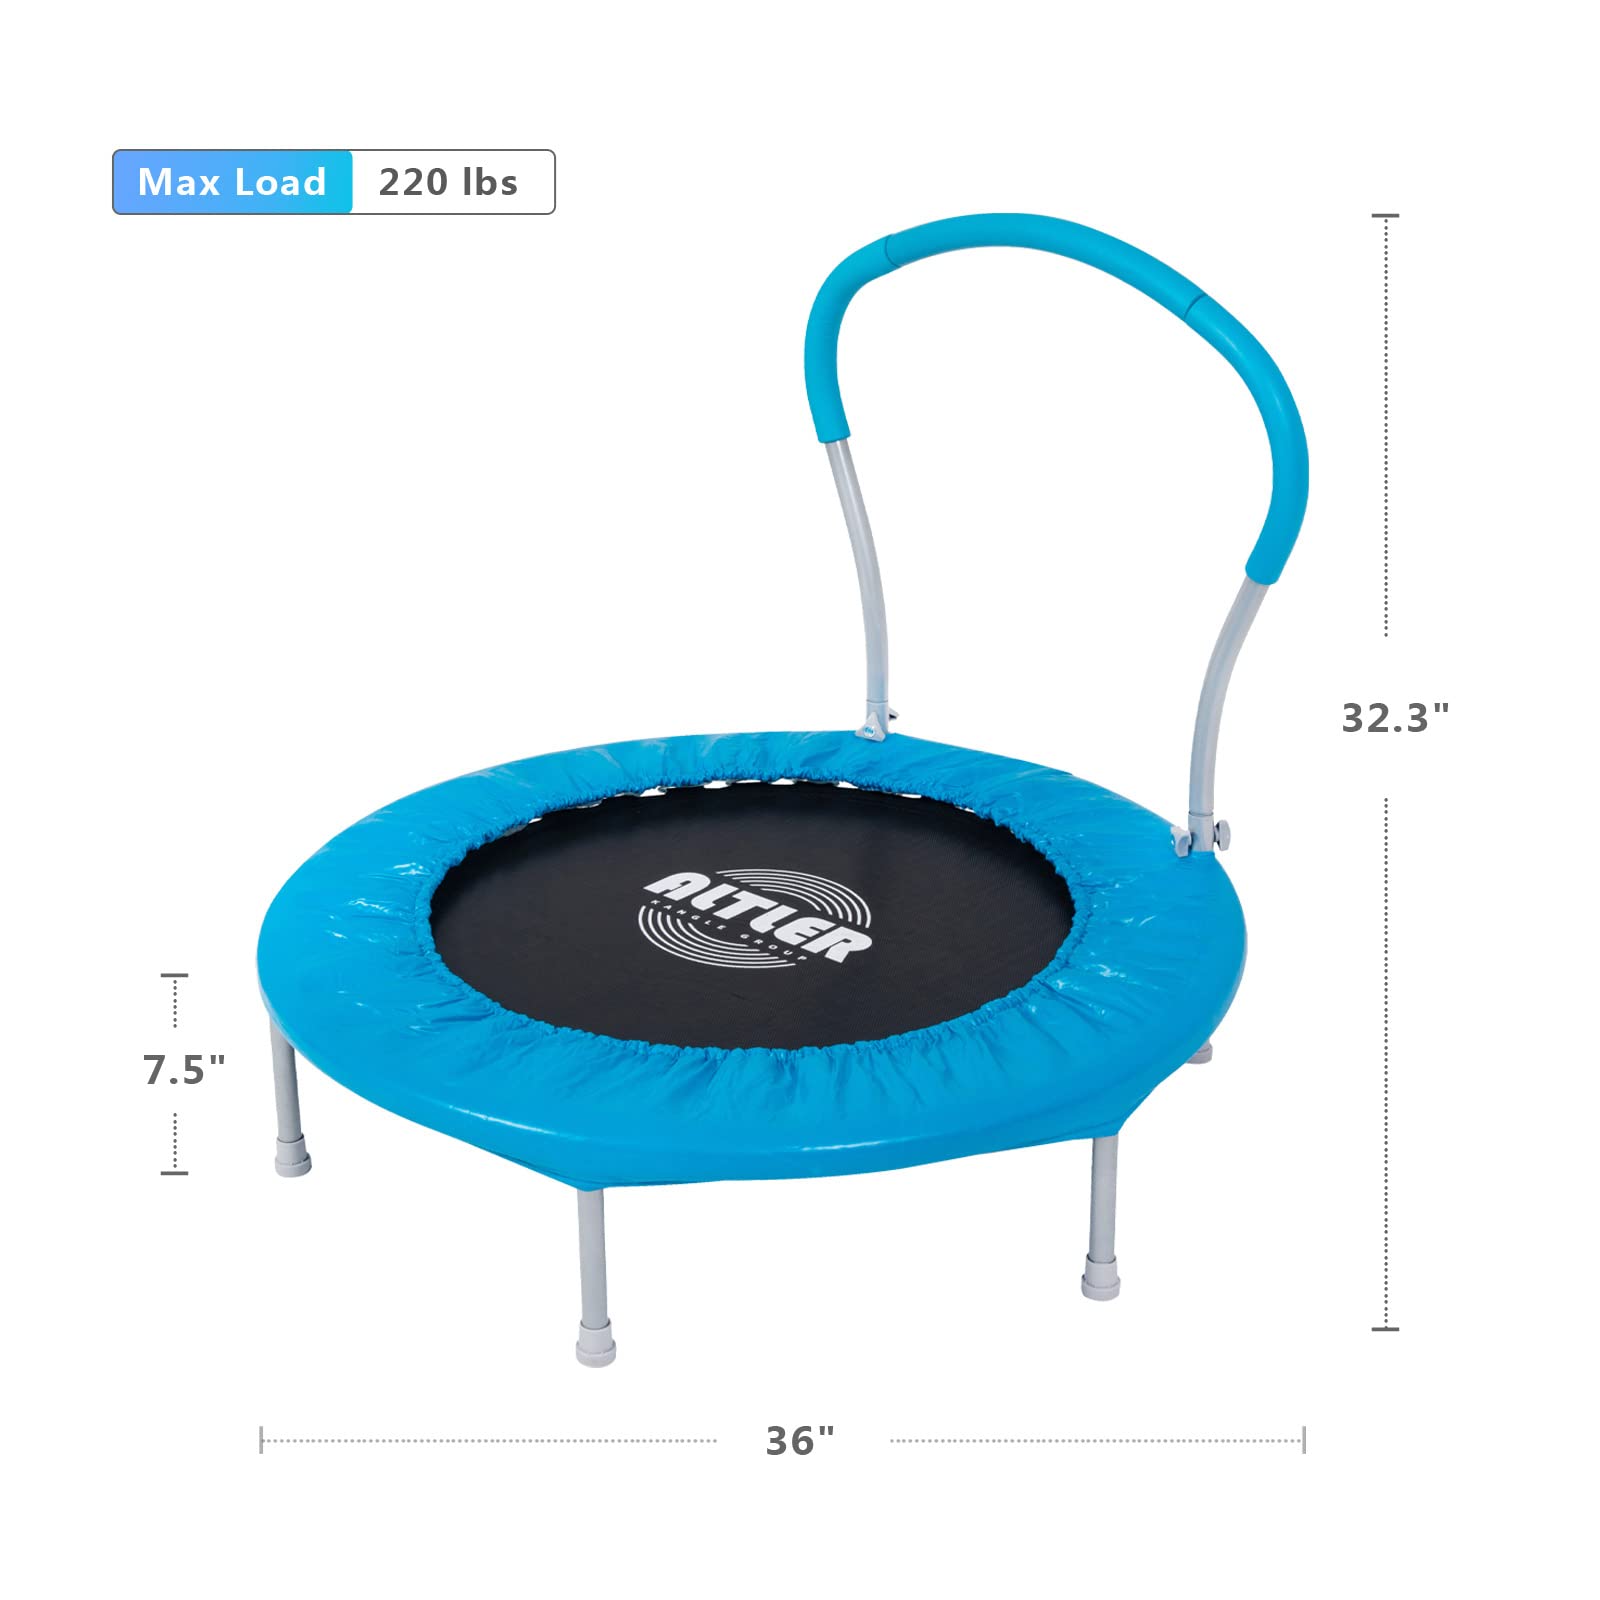 ALTLER 36-Inch Kids Trampoline for Toddlers, Portable Recreational Children with Handle and Safety Padded Cover, Mini Trampoline Indoor or Outdoor Jump Sports, Max Load 220 LBS, Blue